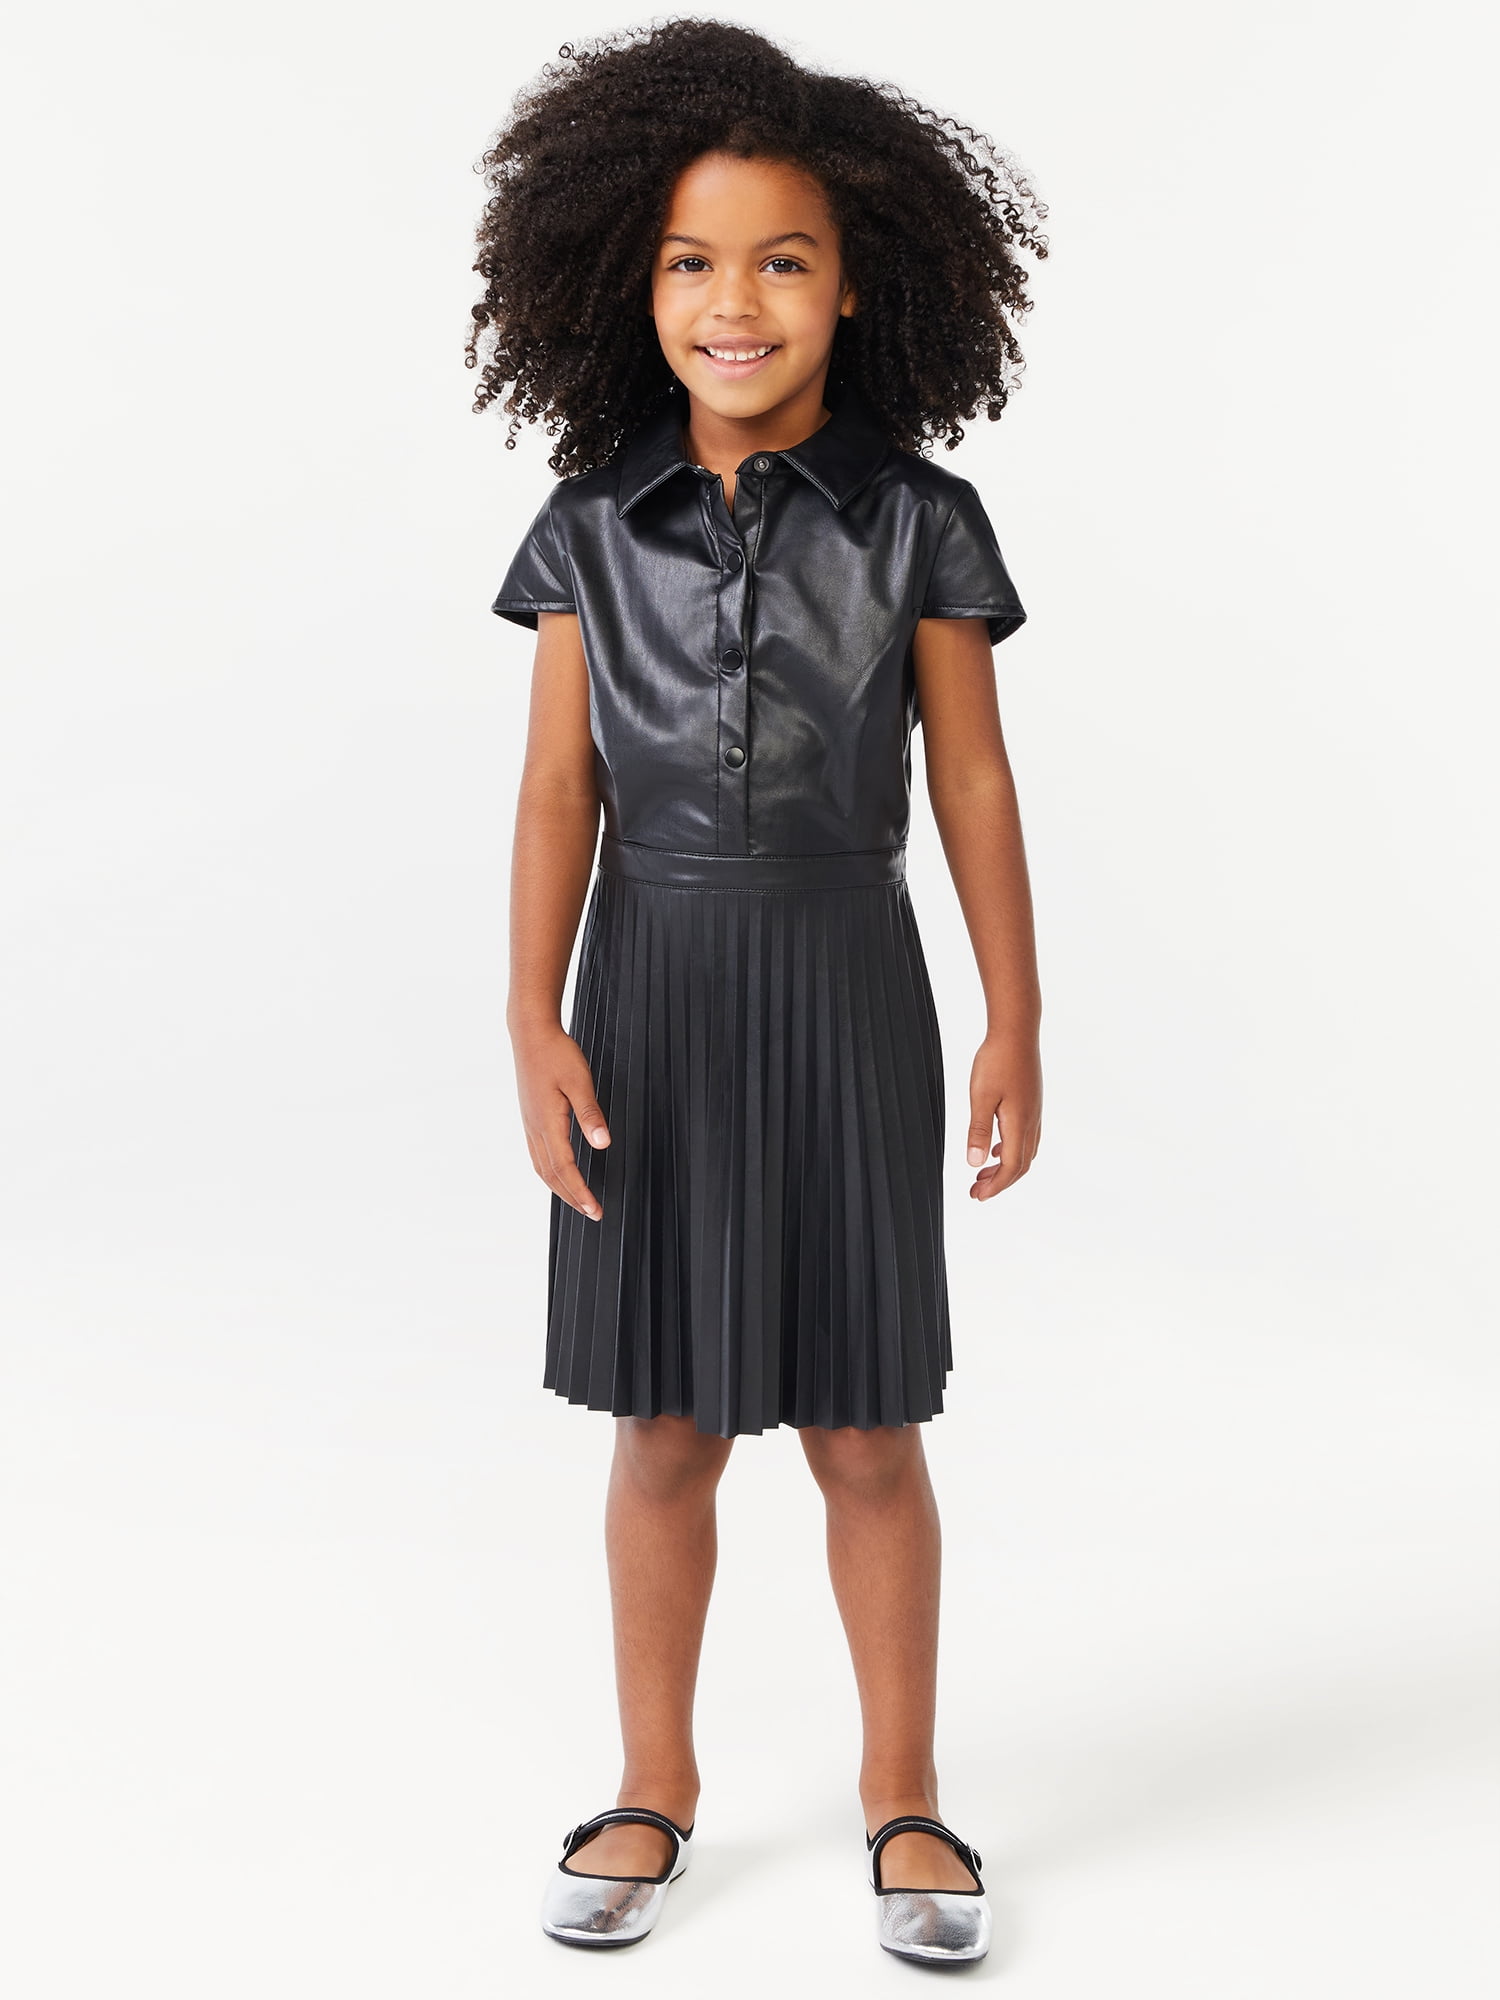 Scoop Girls Short Sleeve Pleated Faux Leather Dress, Sizes 4-12 ...